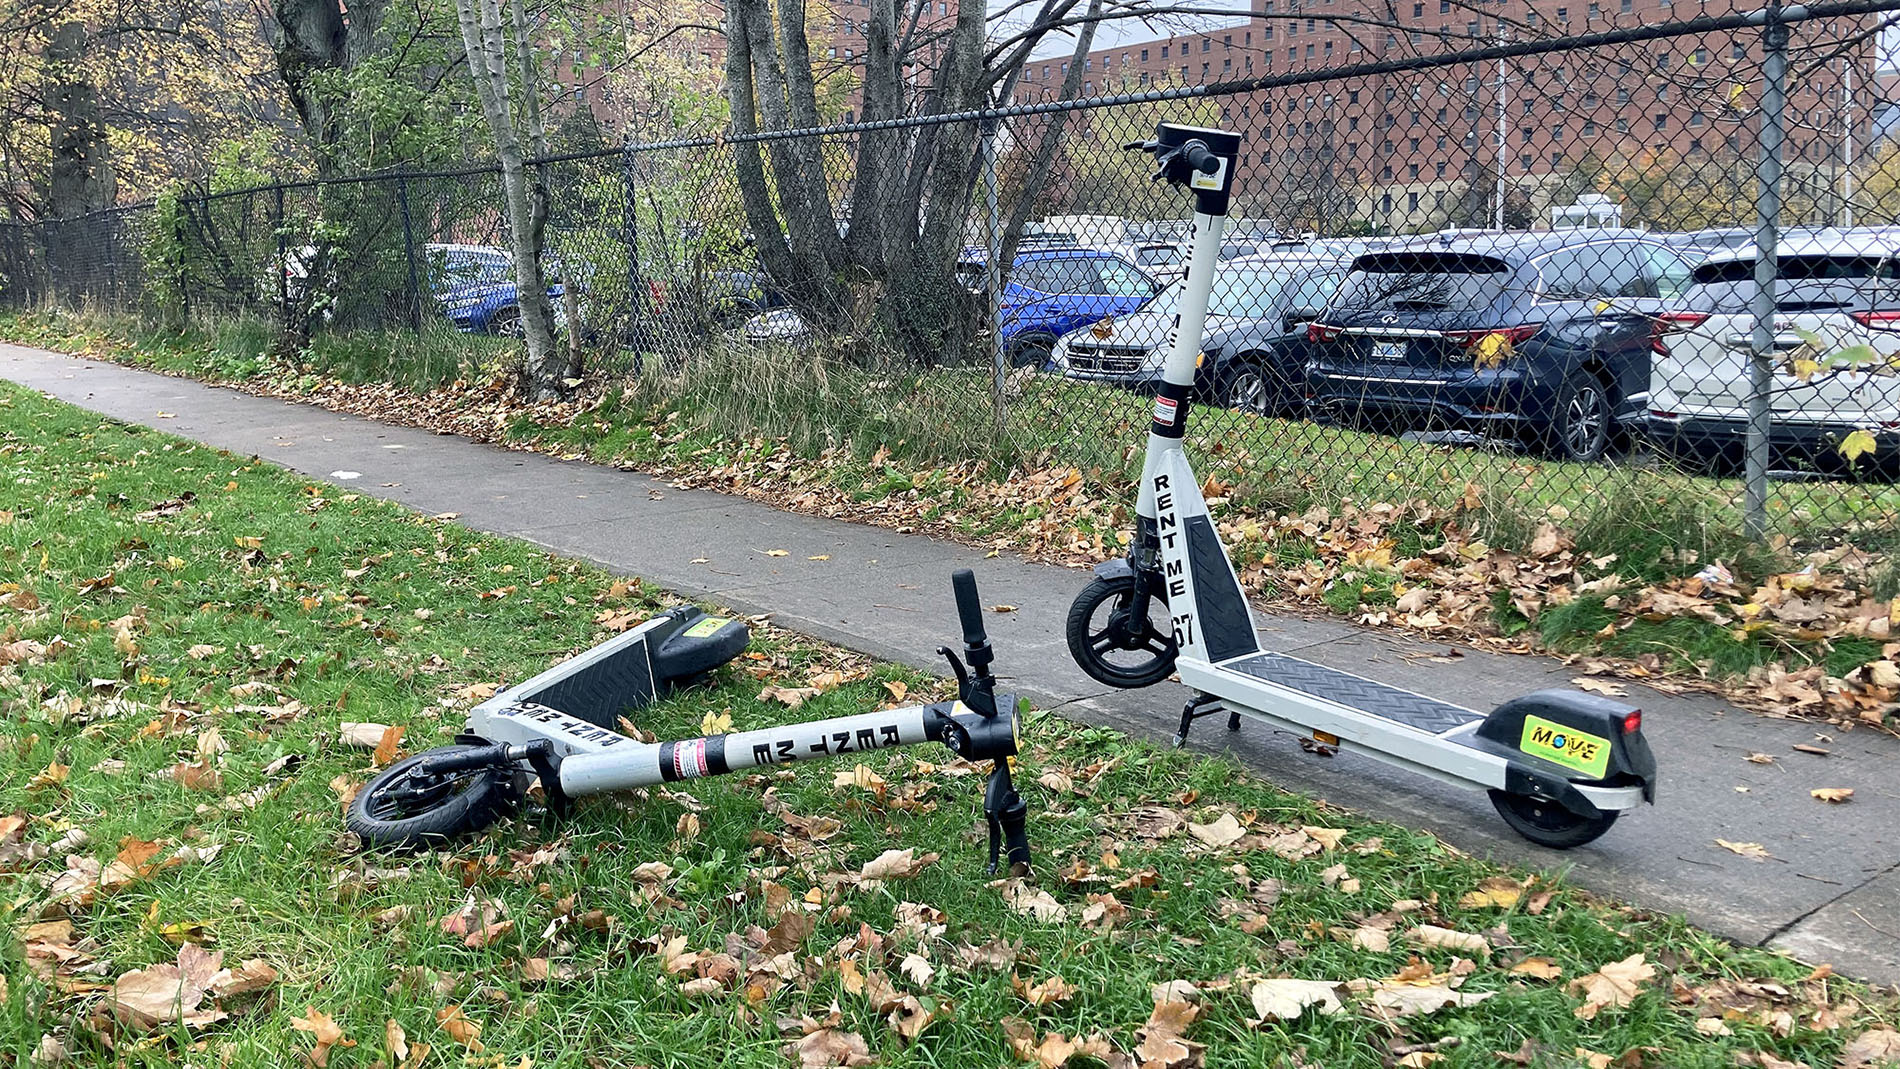 Two e-scooters next to a sidewalk